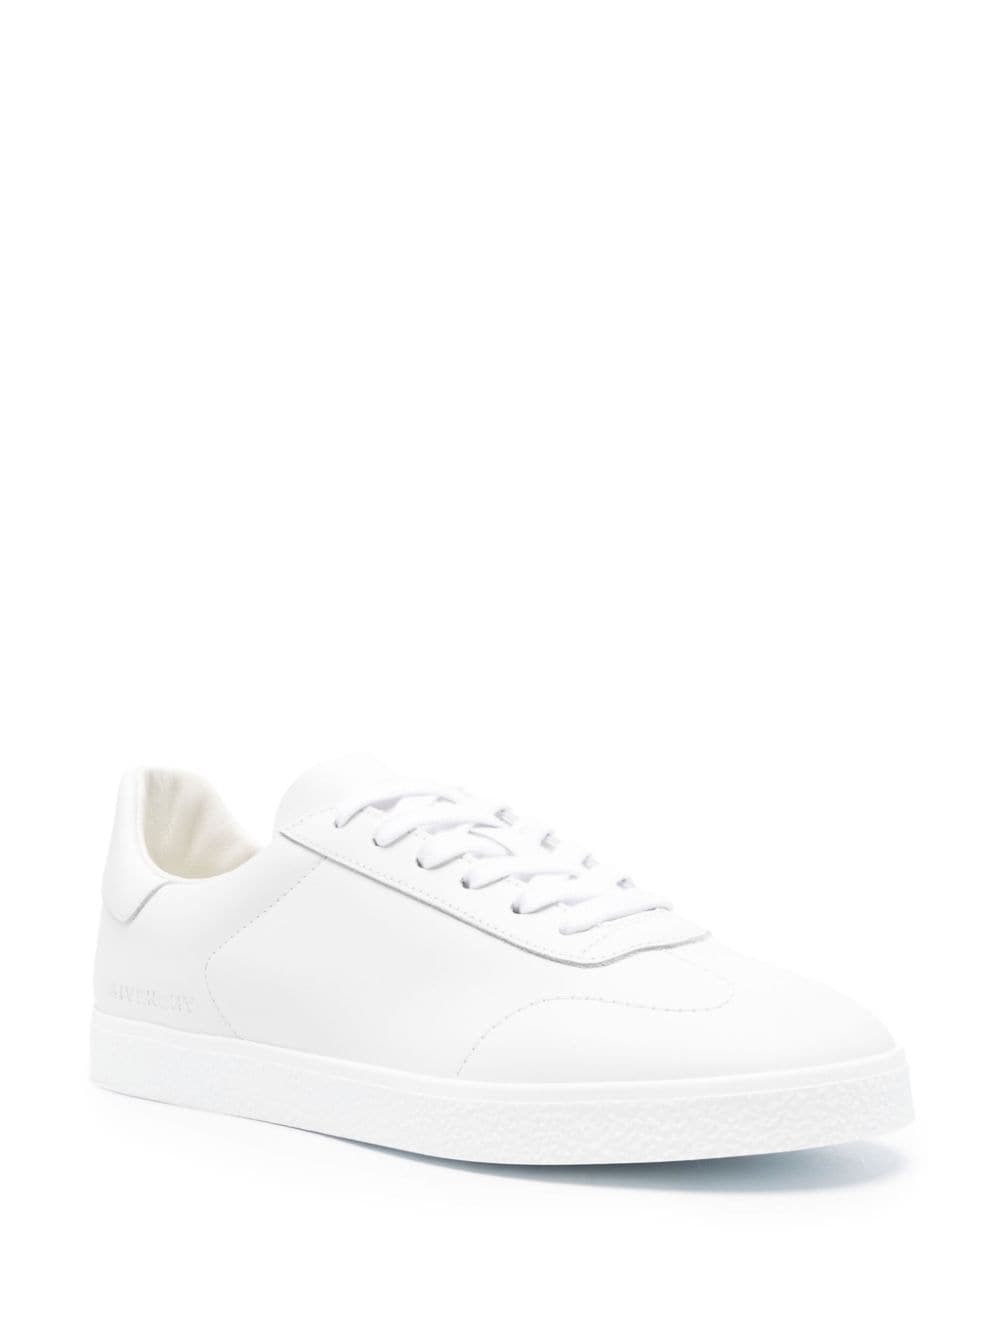 Givenchy Town leren sneakers - Wit